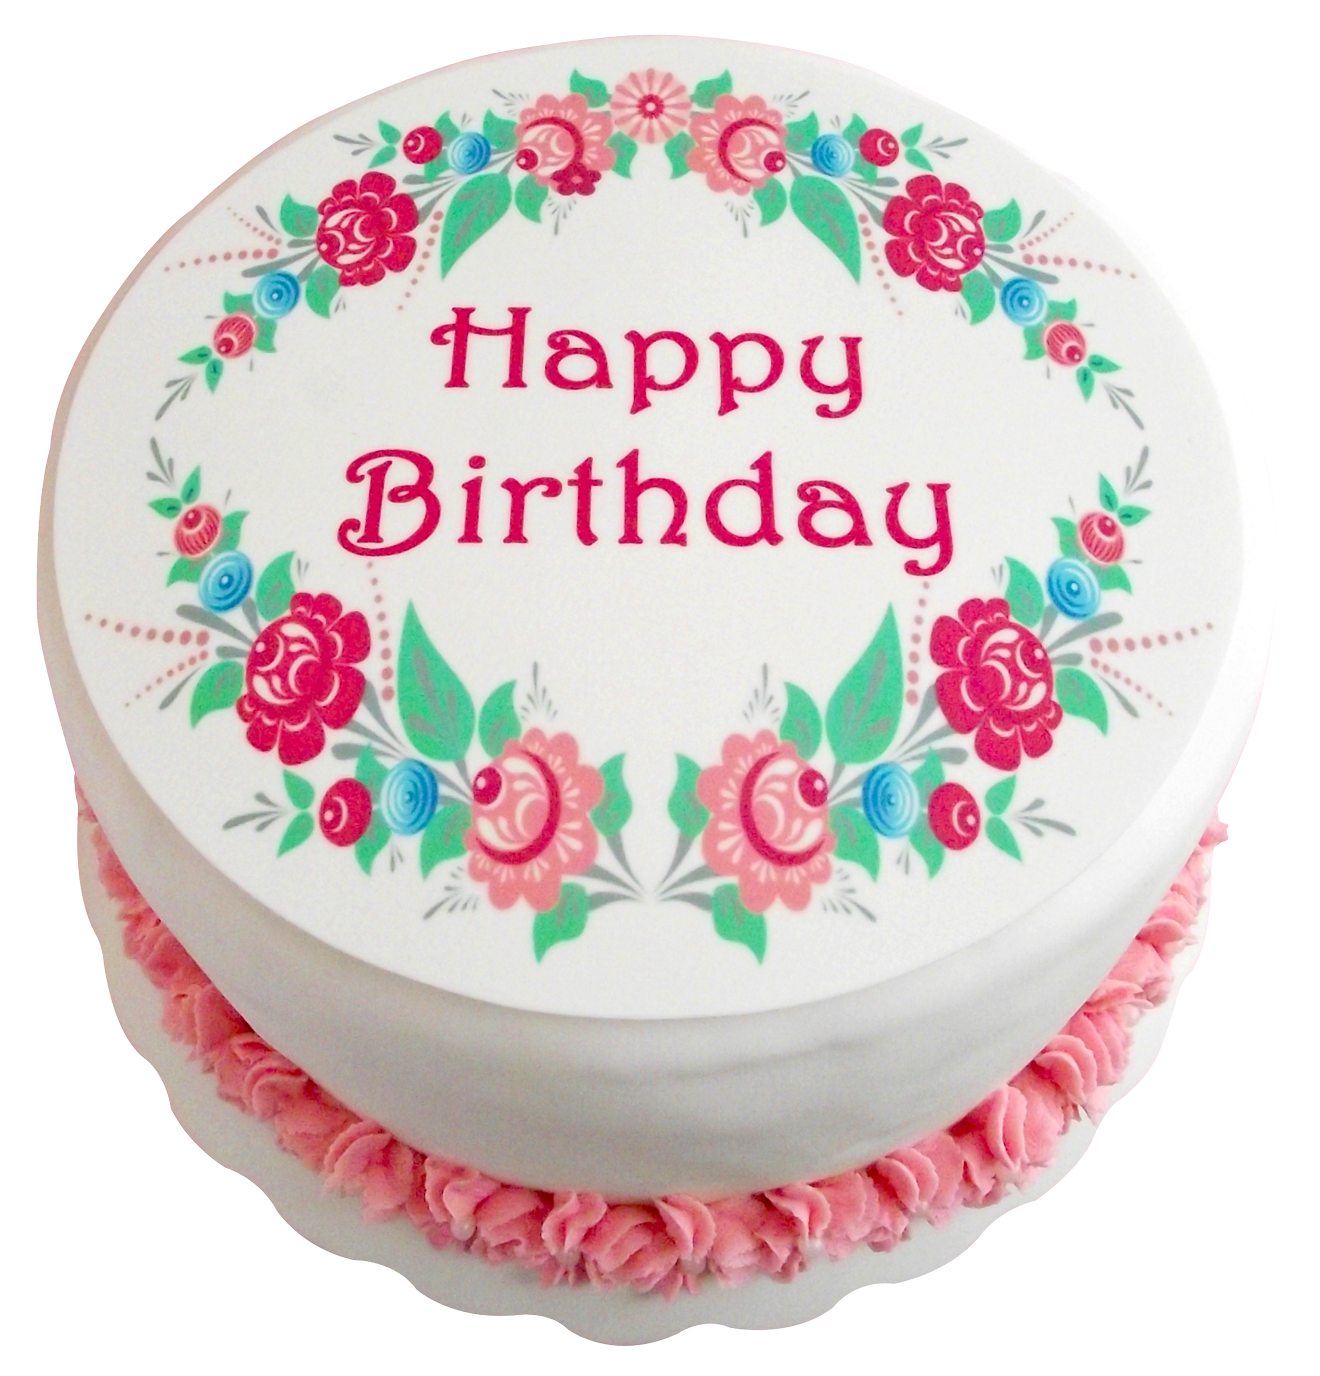 happy birthday cake clipart picture #40704